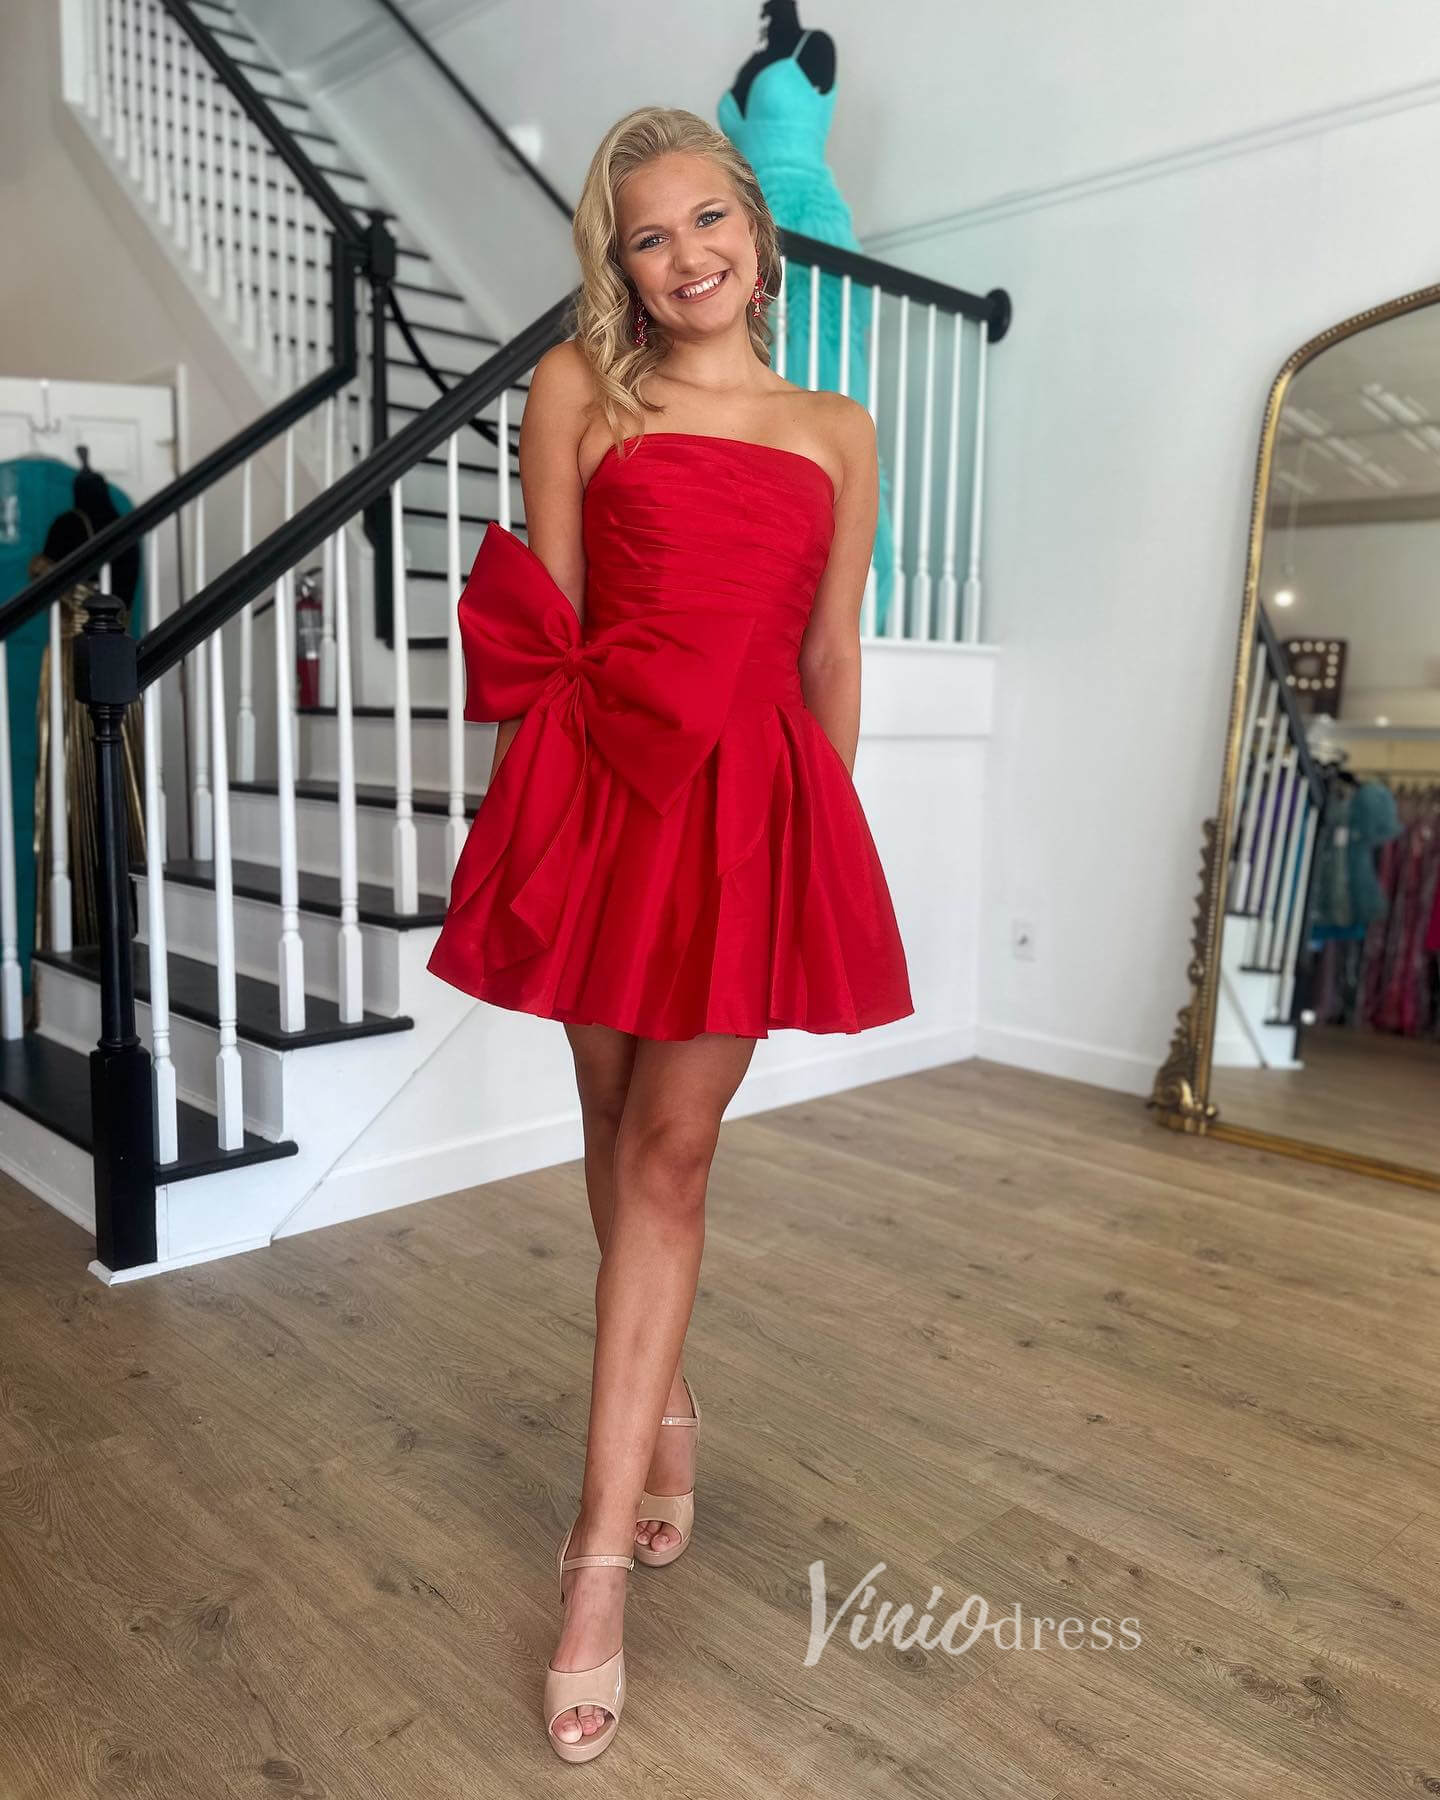 Red Strapless Satin Homecoming Dresses Bow-Tie Short Prom Dress SD1640-prom dresses-Viniodress-Viniodress